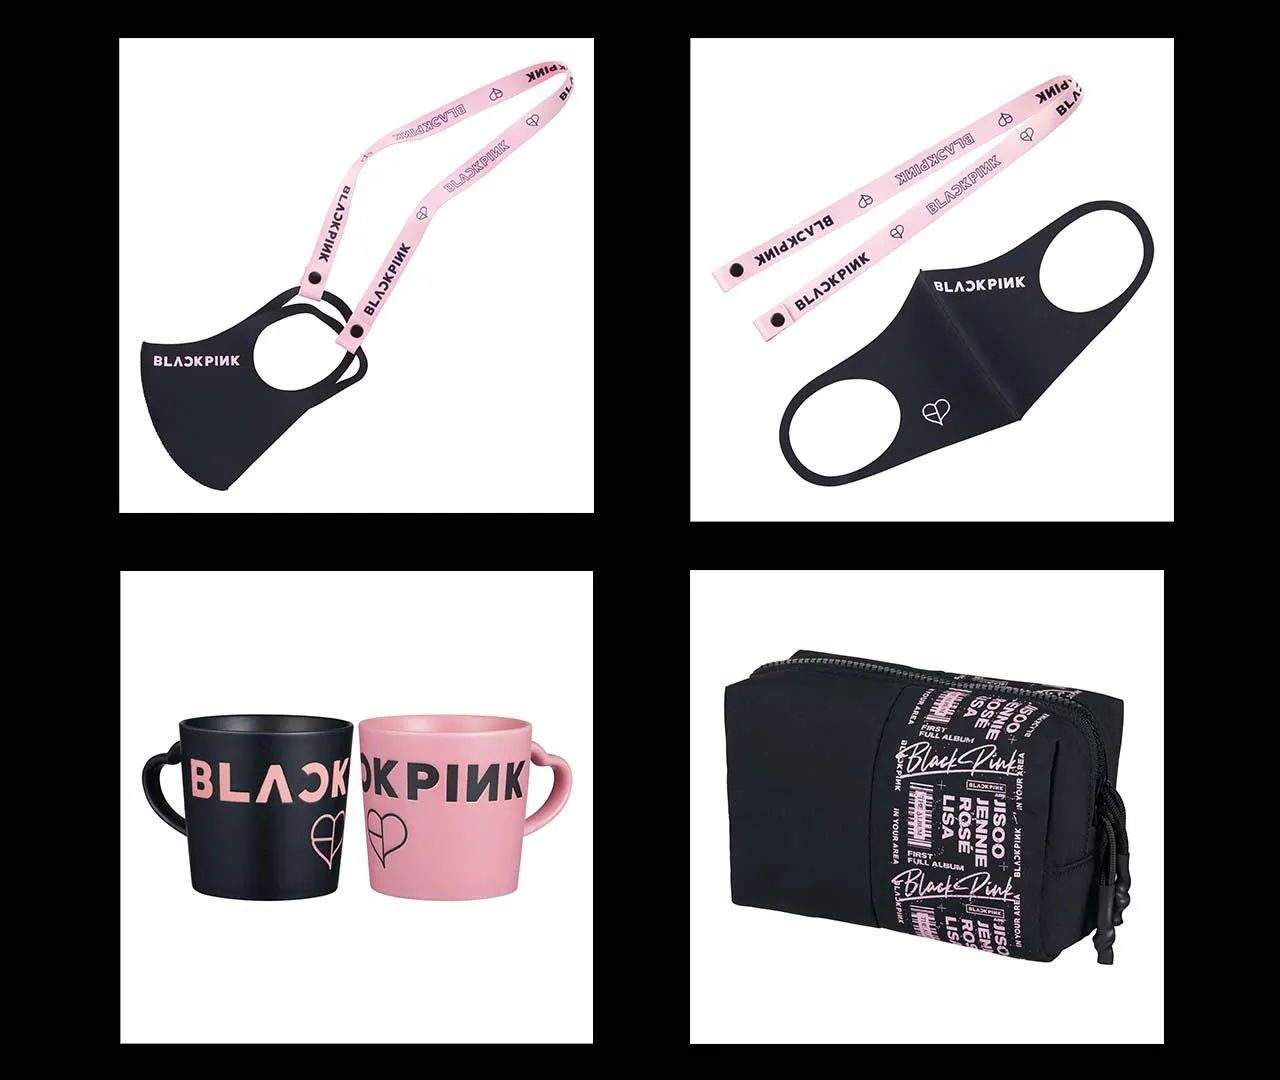 「BLACKPINK POPUP STORE in PARCO」でも購入できるグッズ